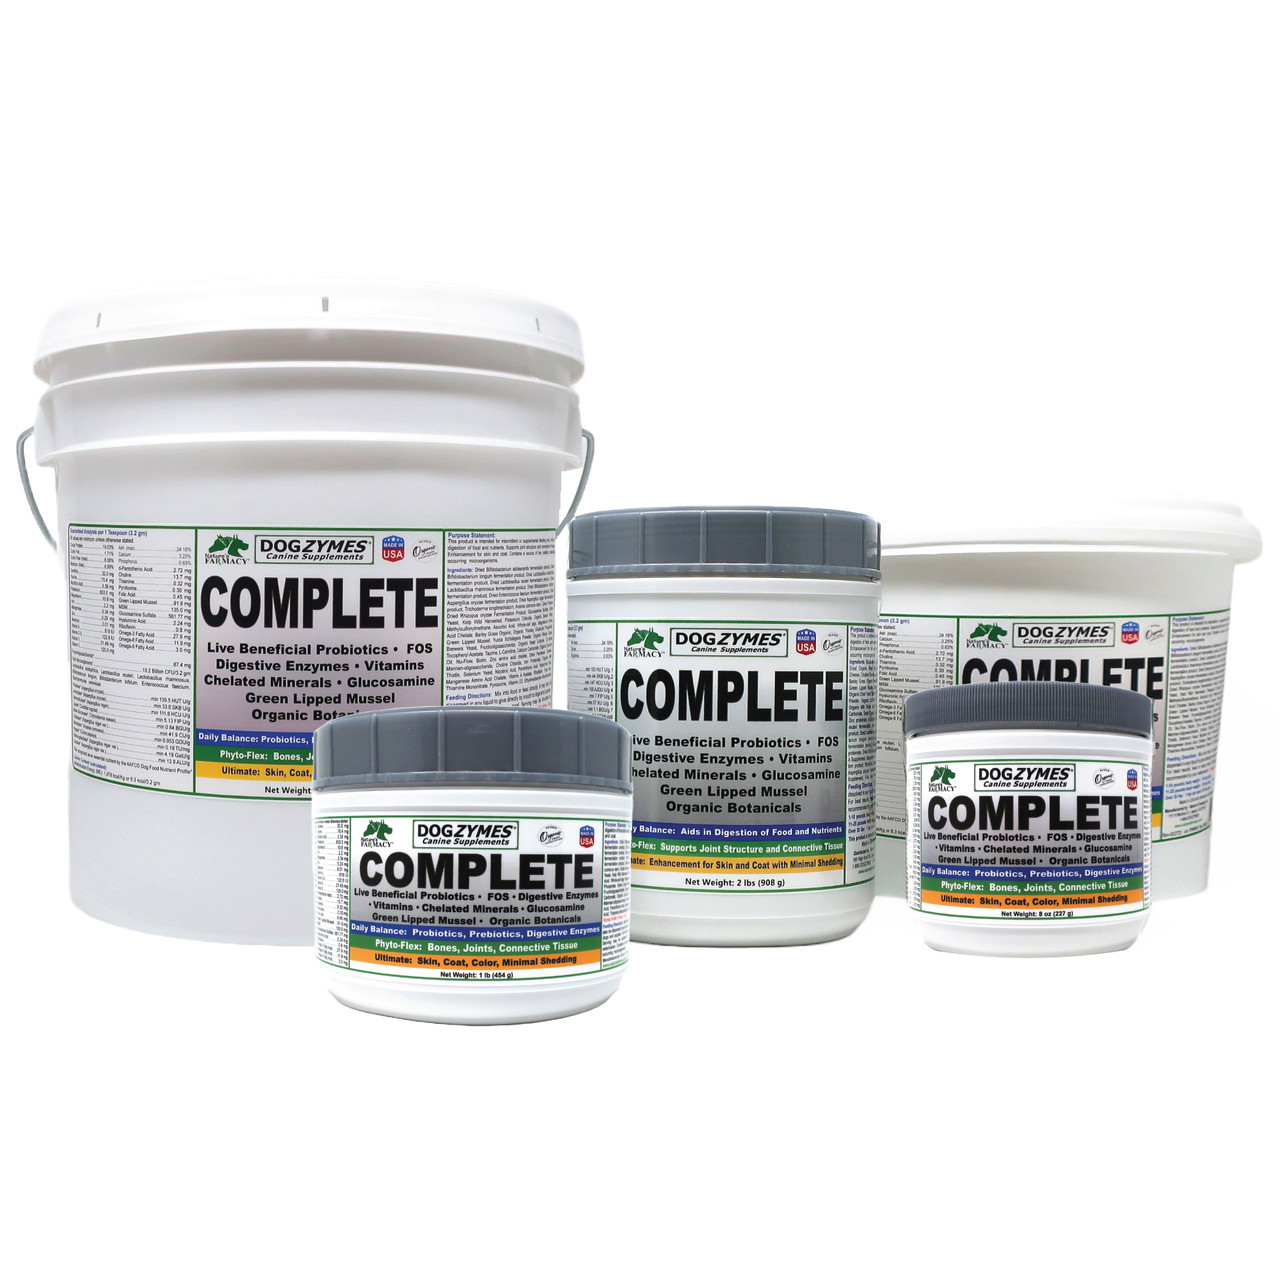 Image of Dogzymes Complete 3 Best Sellers in one Product